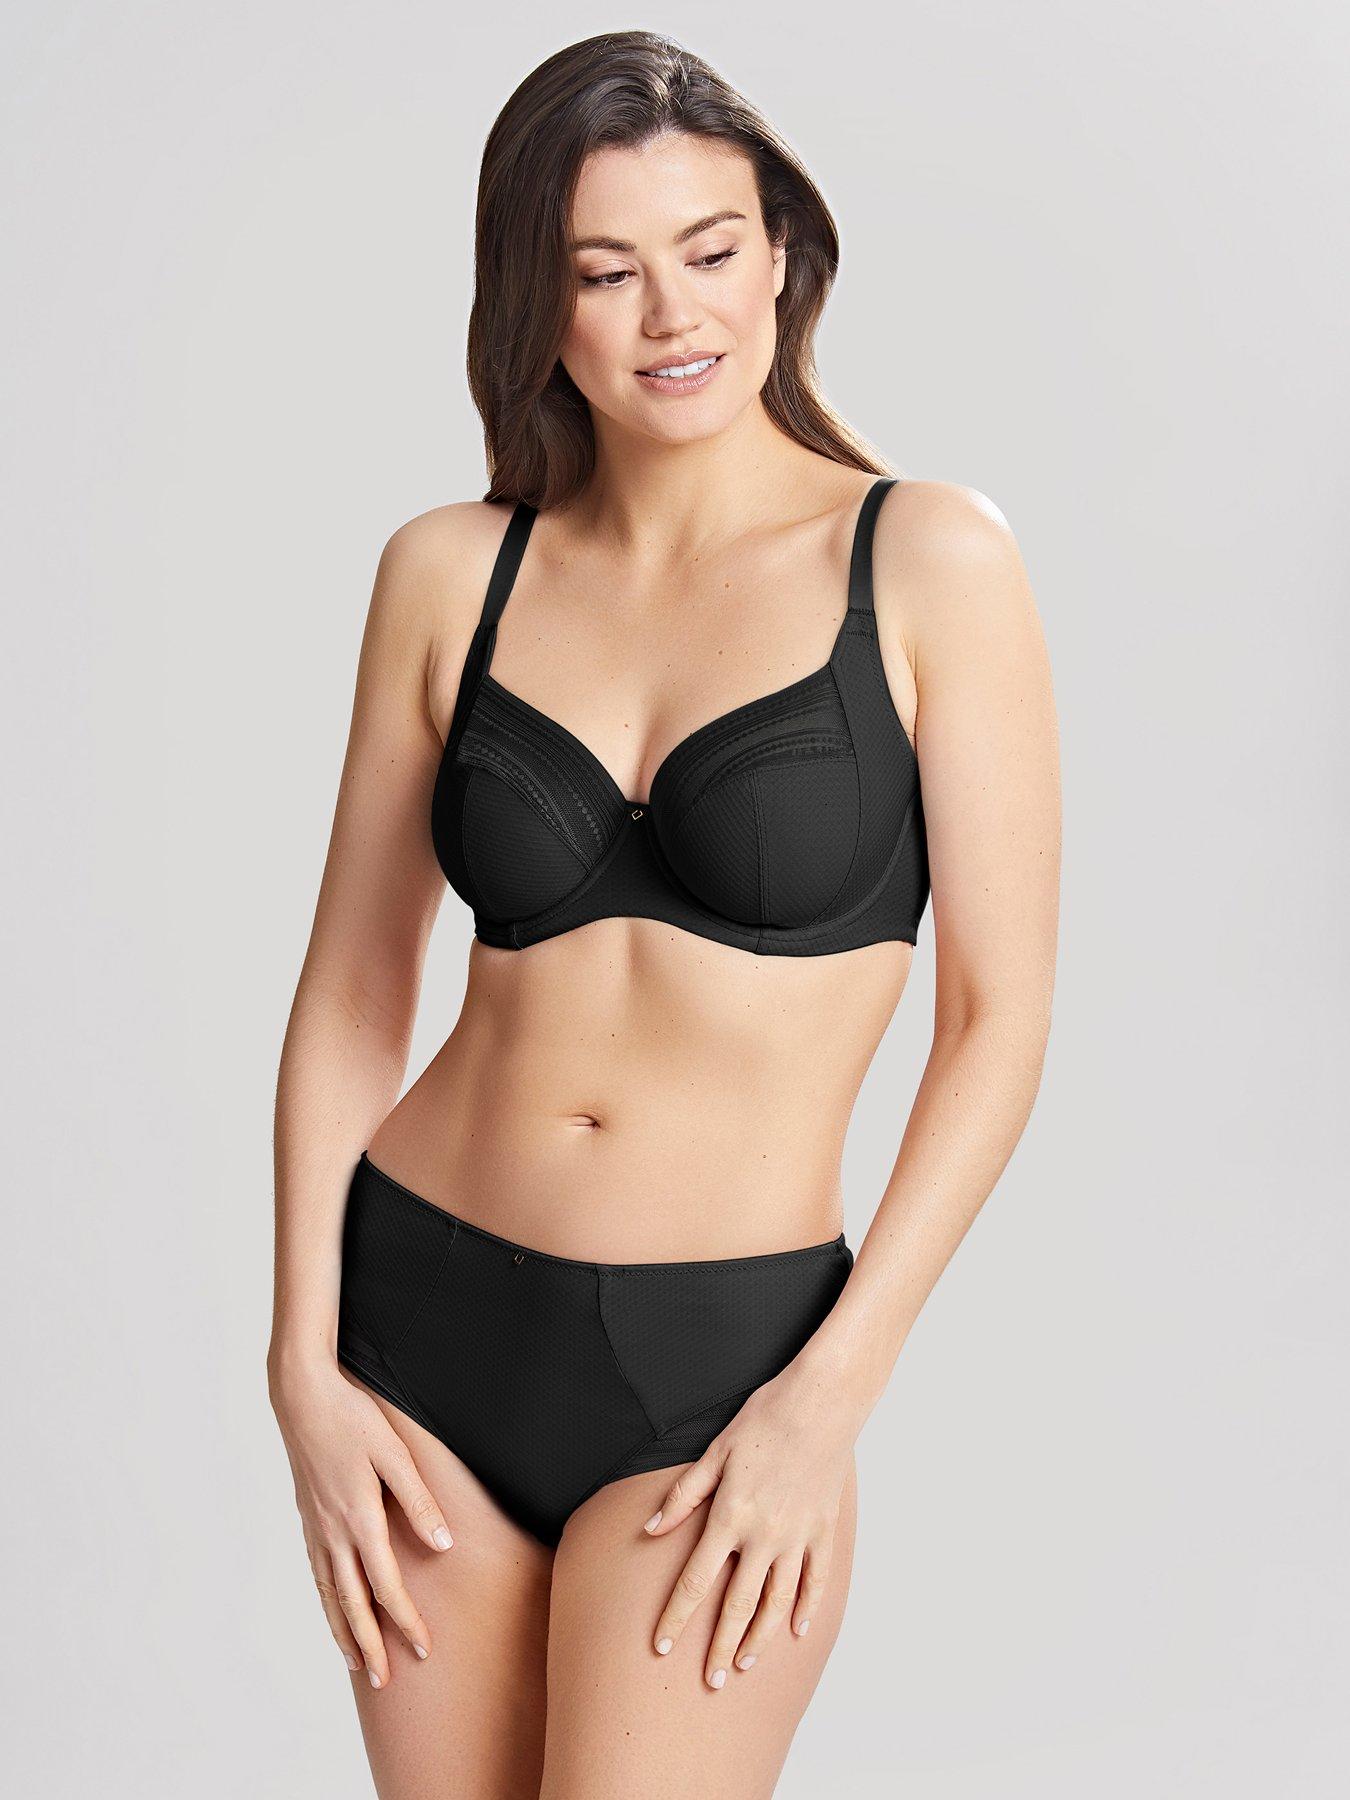 What makes our Serene Full Cup a fuller - Panache Lingerie